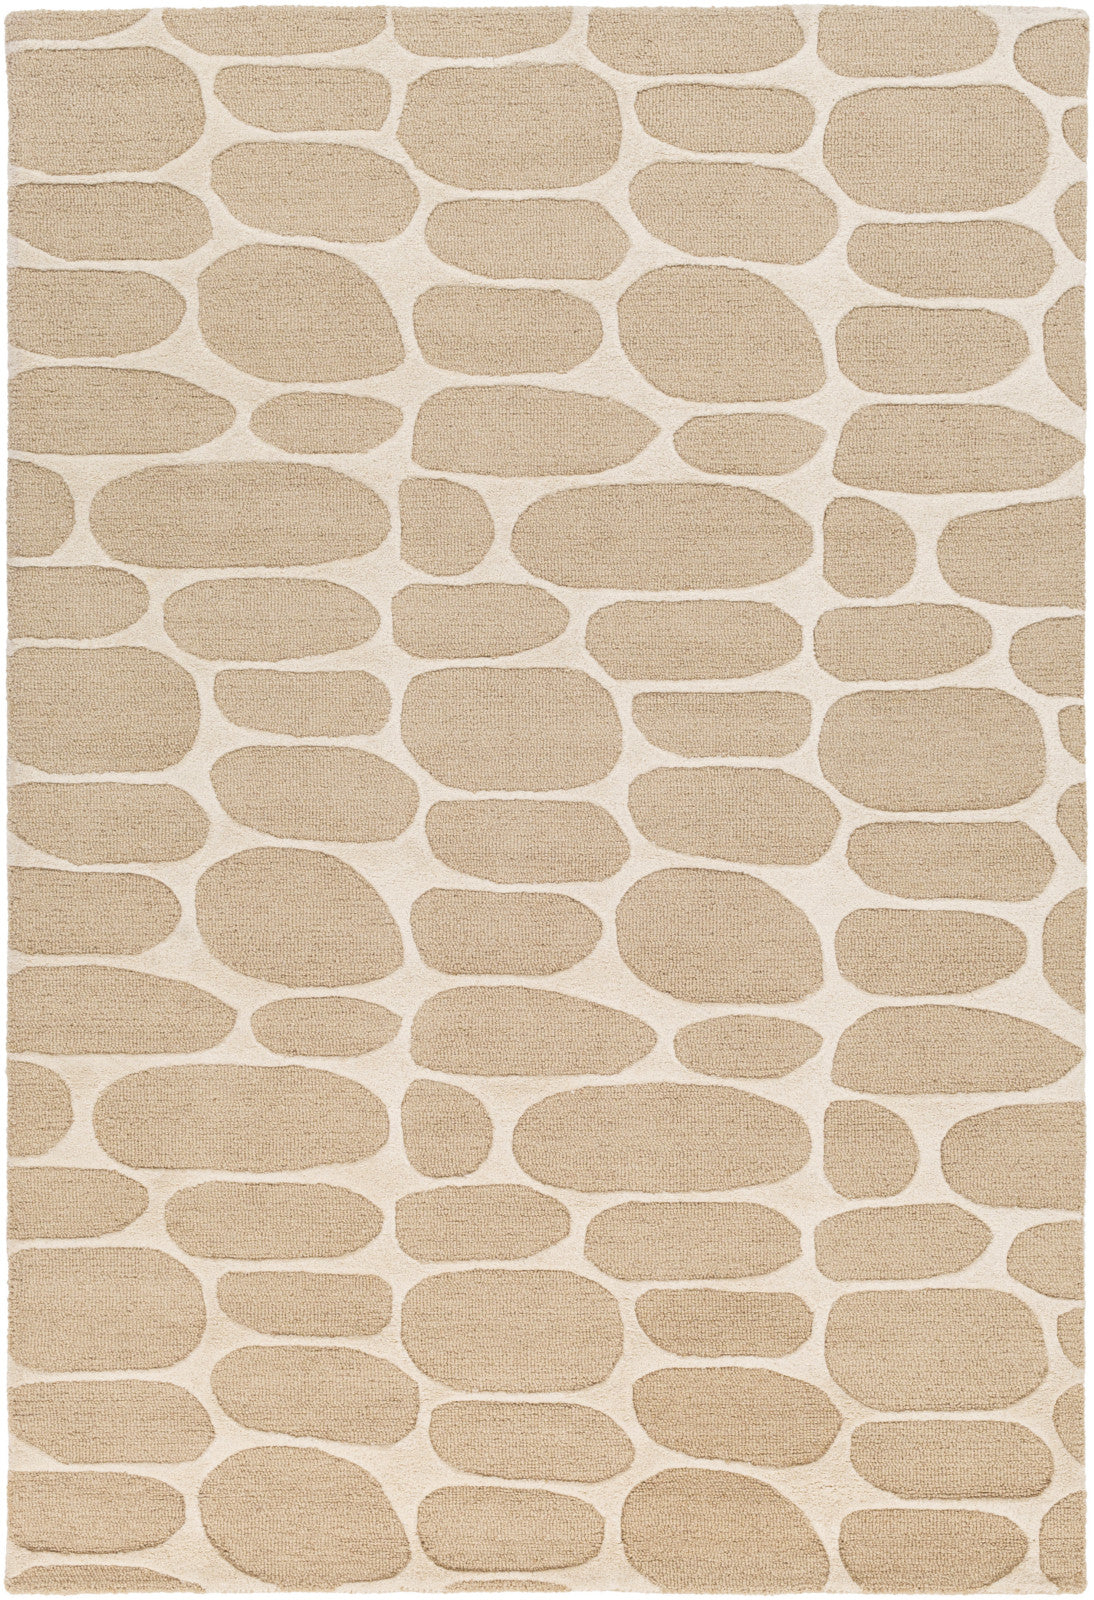 Kennedy KDY-3003 White Area Rug by Surya